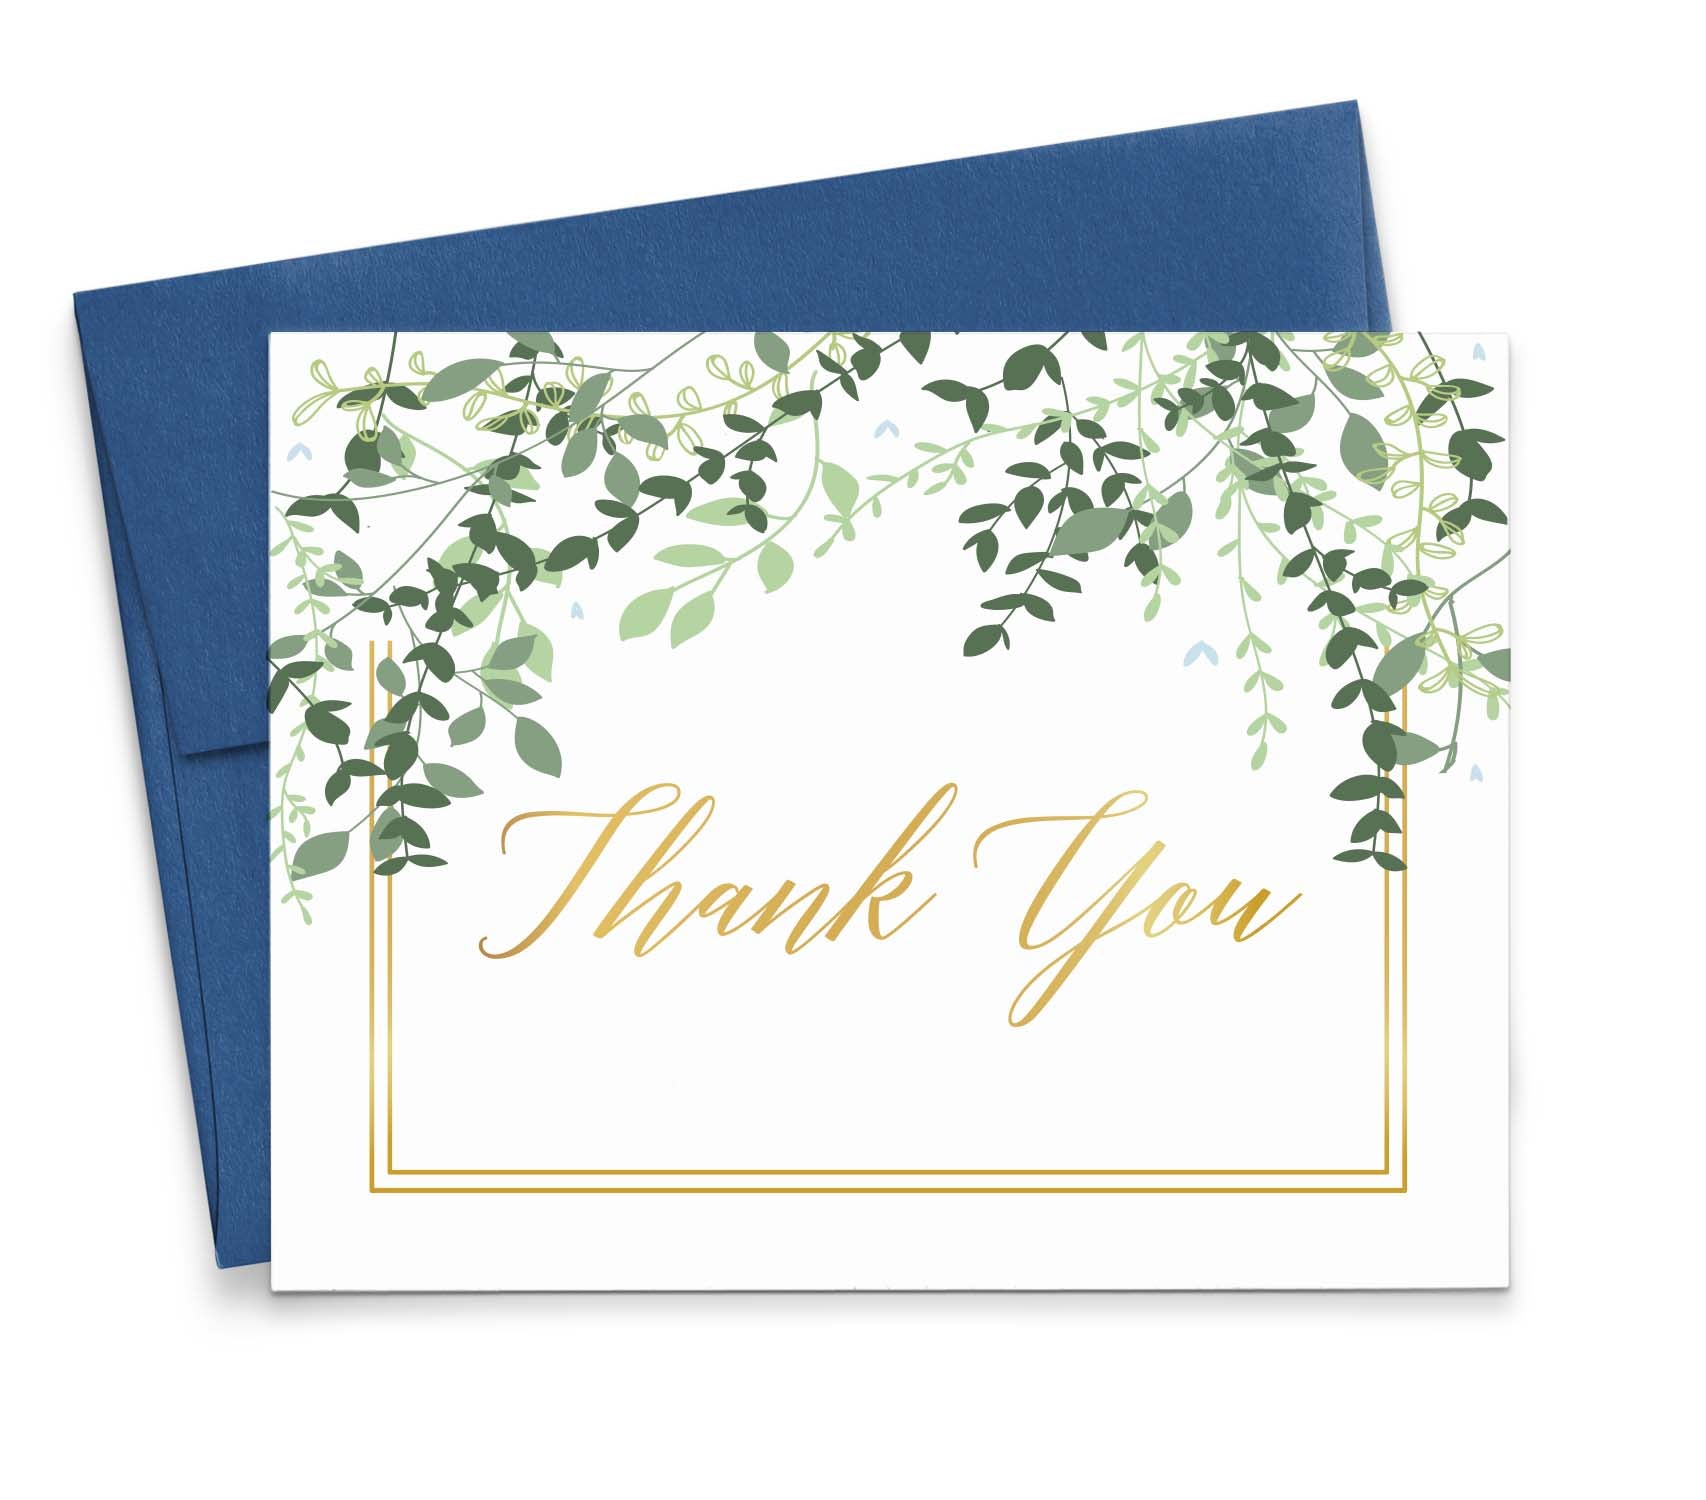 Make Your Own Thank You Cards